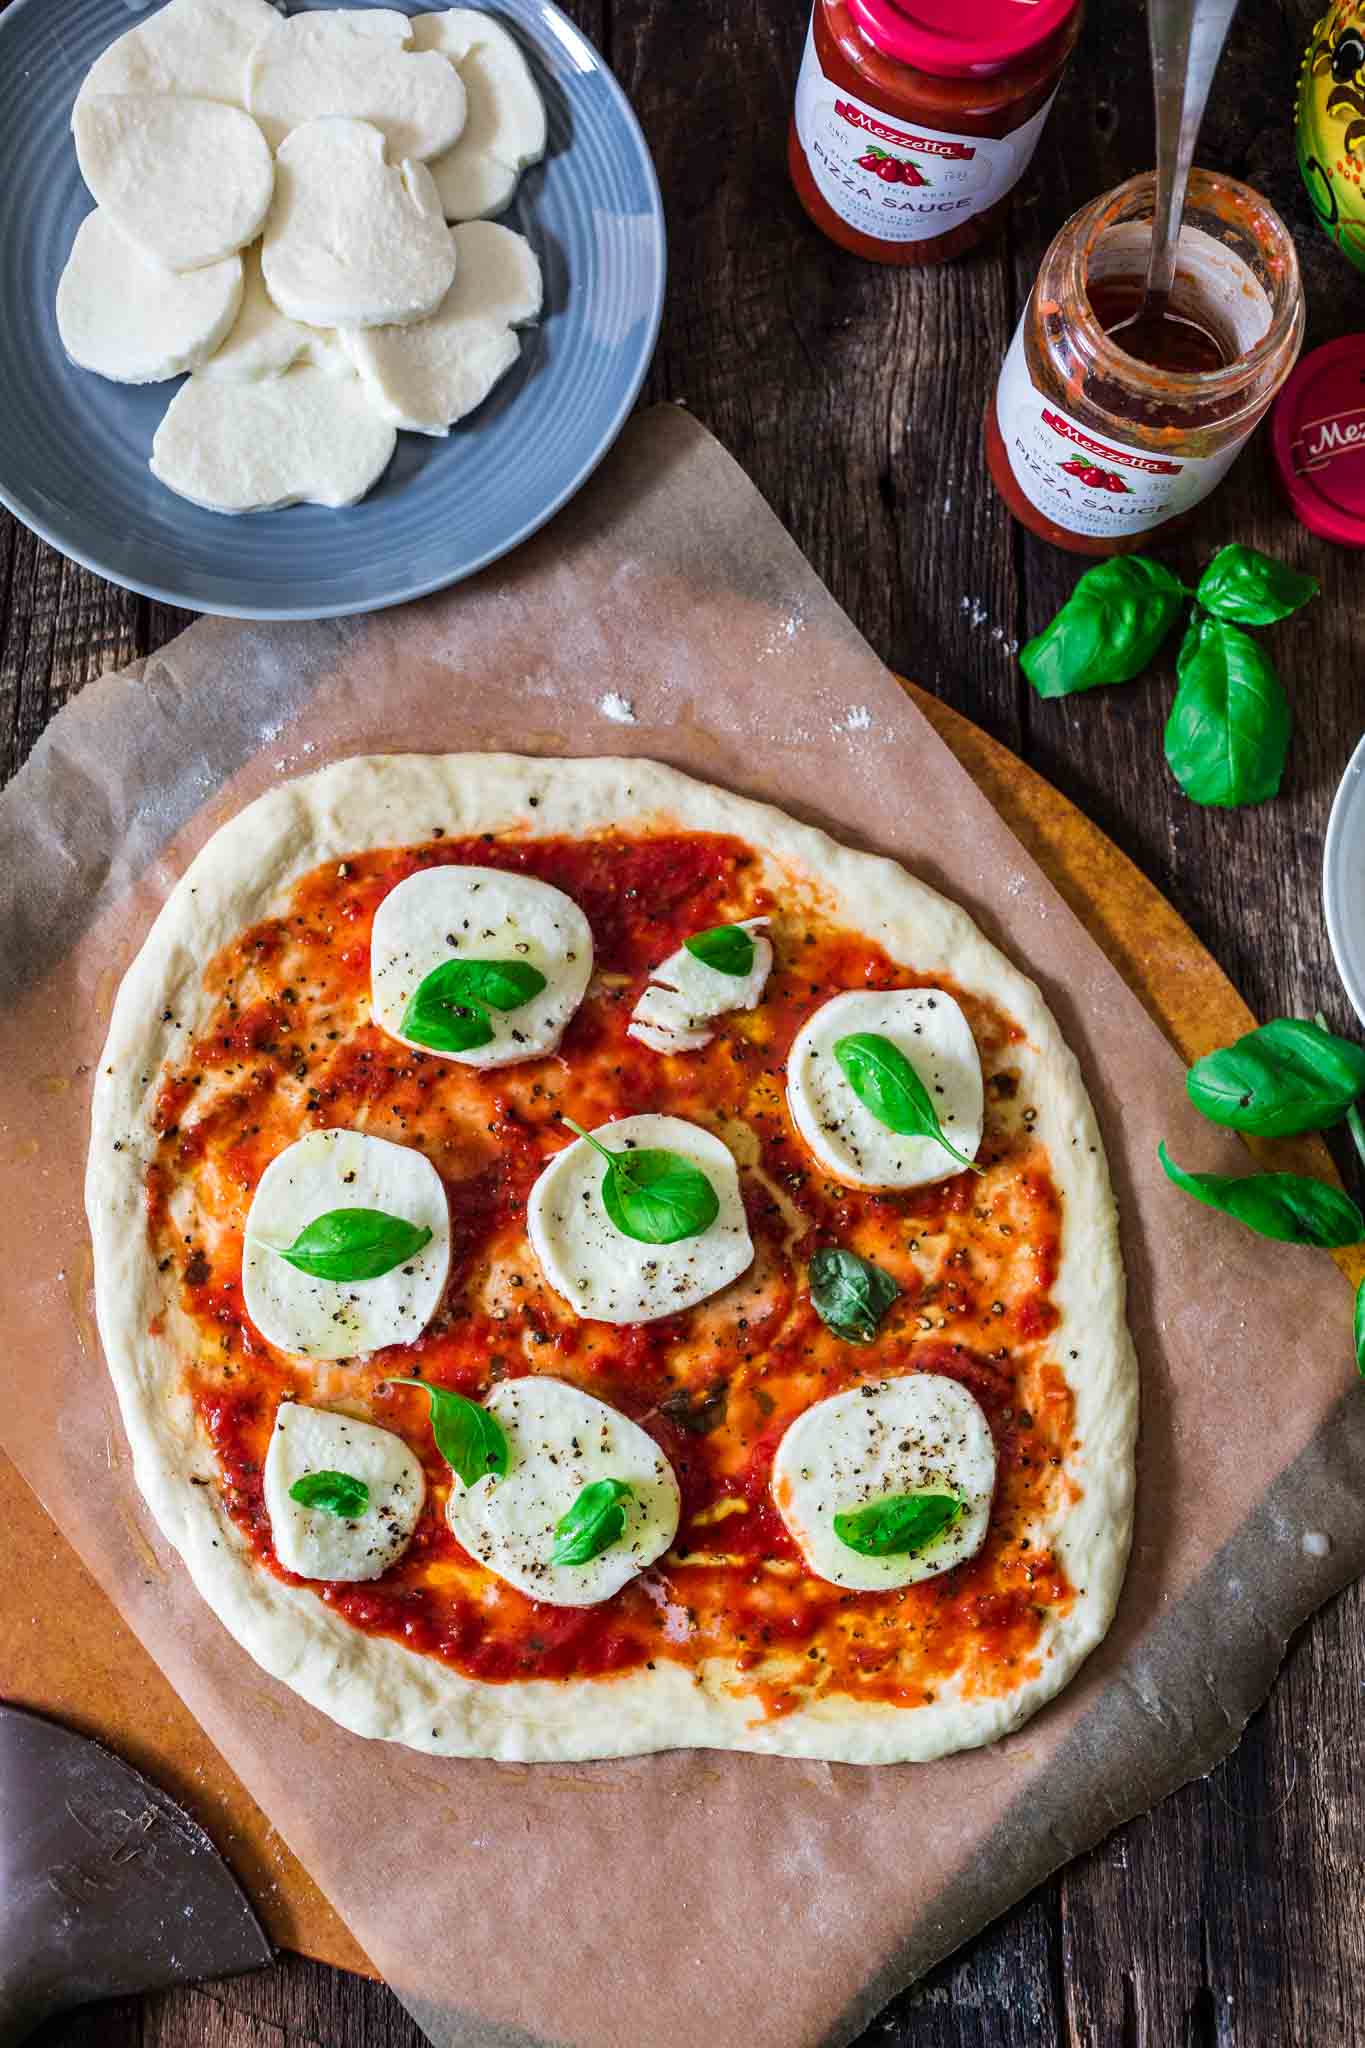 Classic Pizza Margherita | www.oliviascuisine.com | This delicious Margherita pizza is proof that some of the best things in life are the simplest. Only a few fresh ingredients create this iconic pizza from Naples. (In partnership with @Mezzetta.)